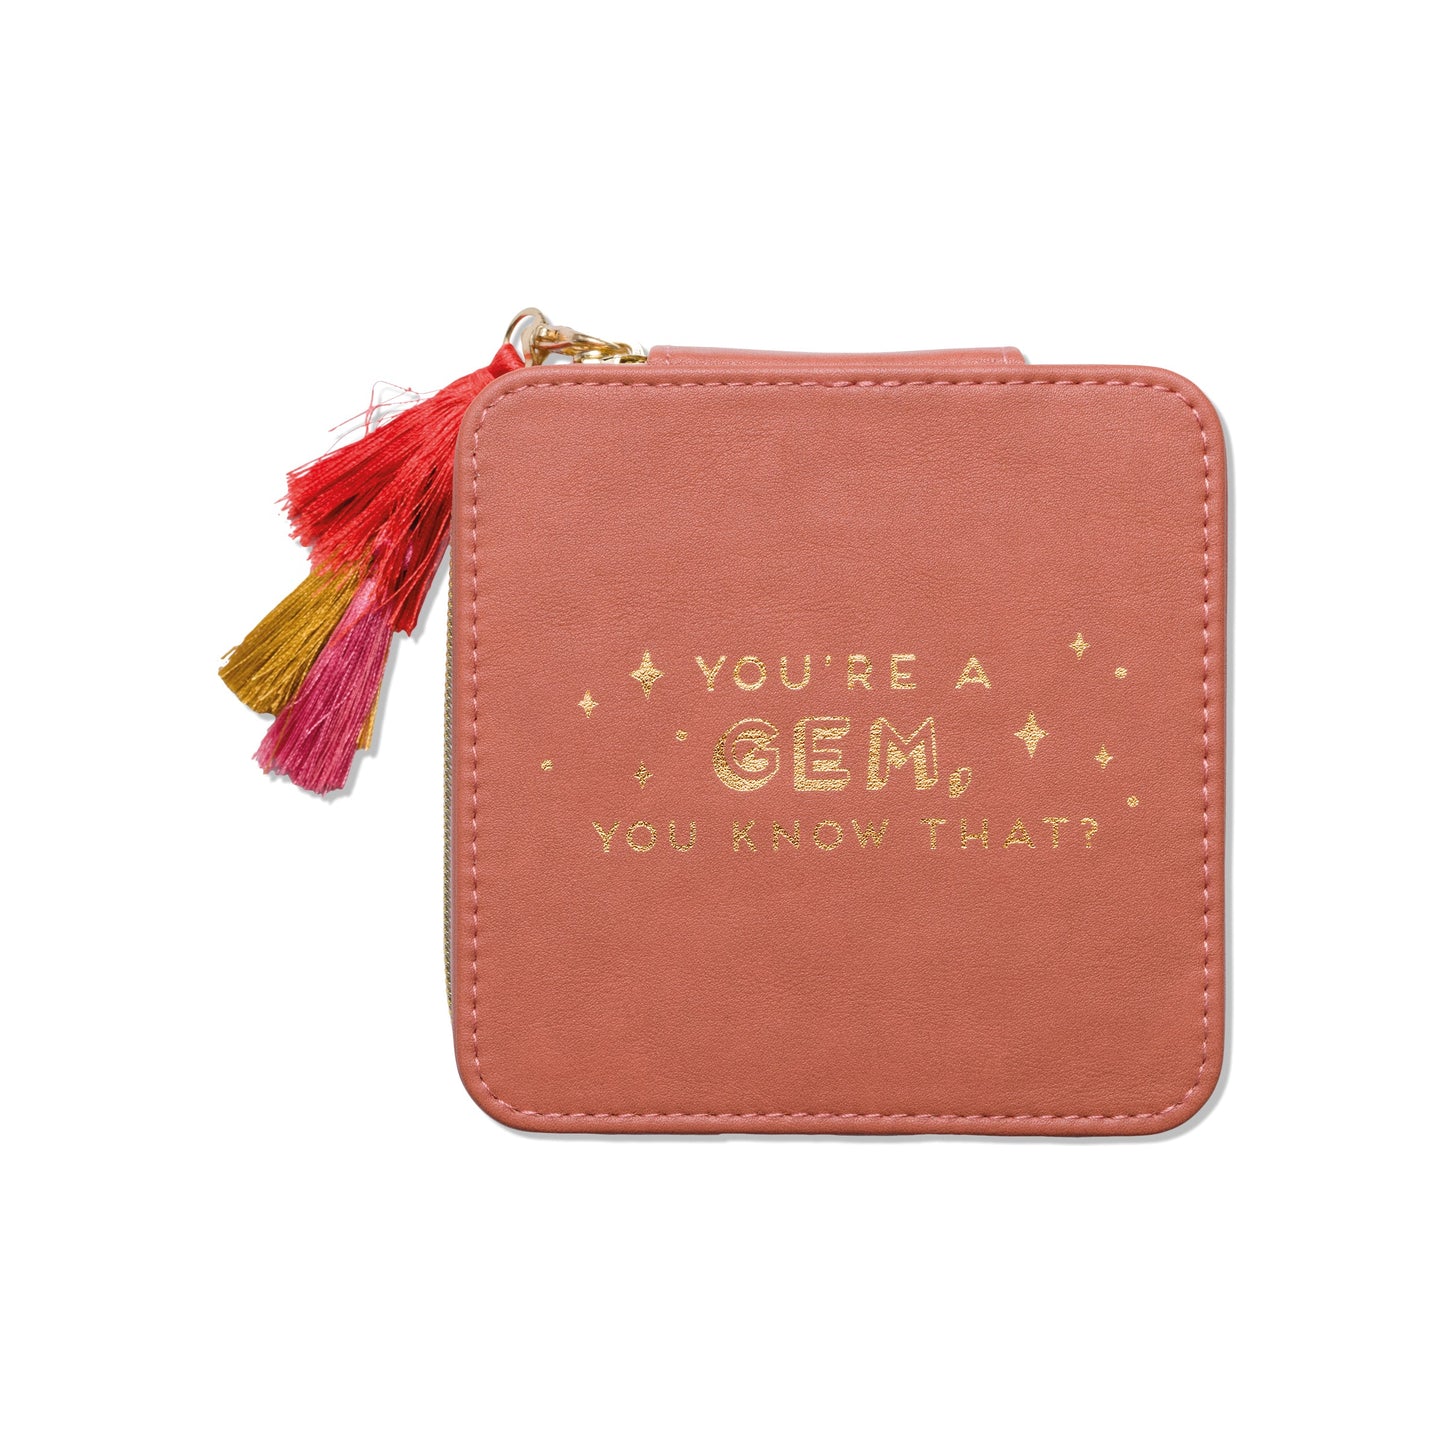 Square mini travel jewelry case with tassels and words printed "you're a Gem you know that?" on a white background